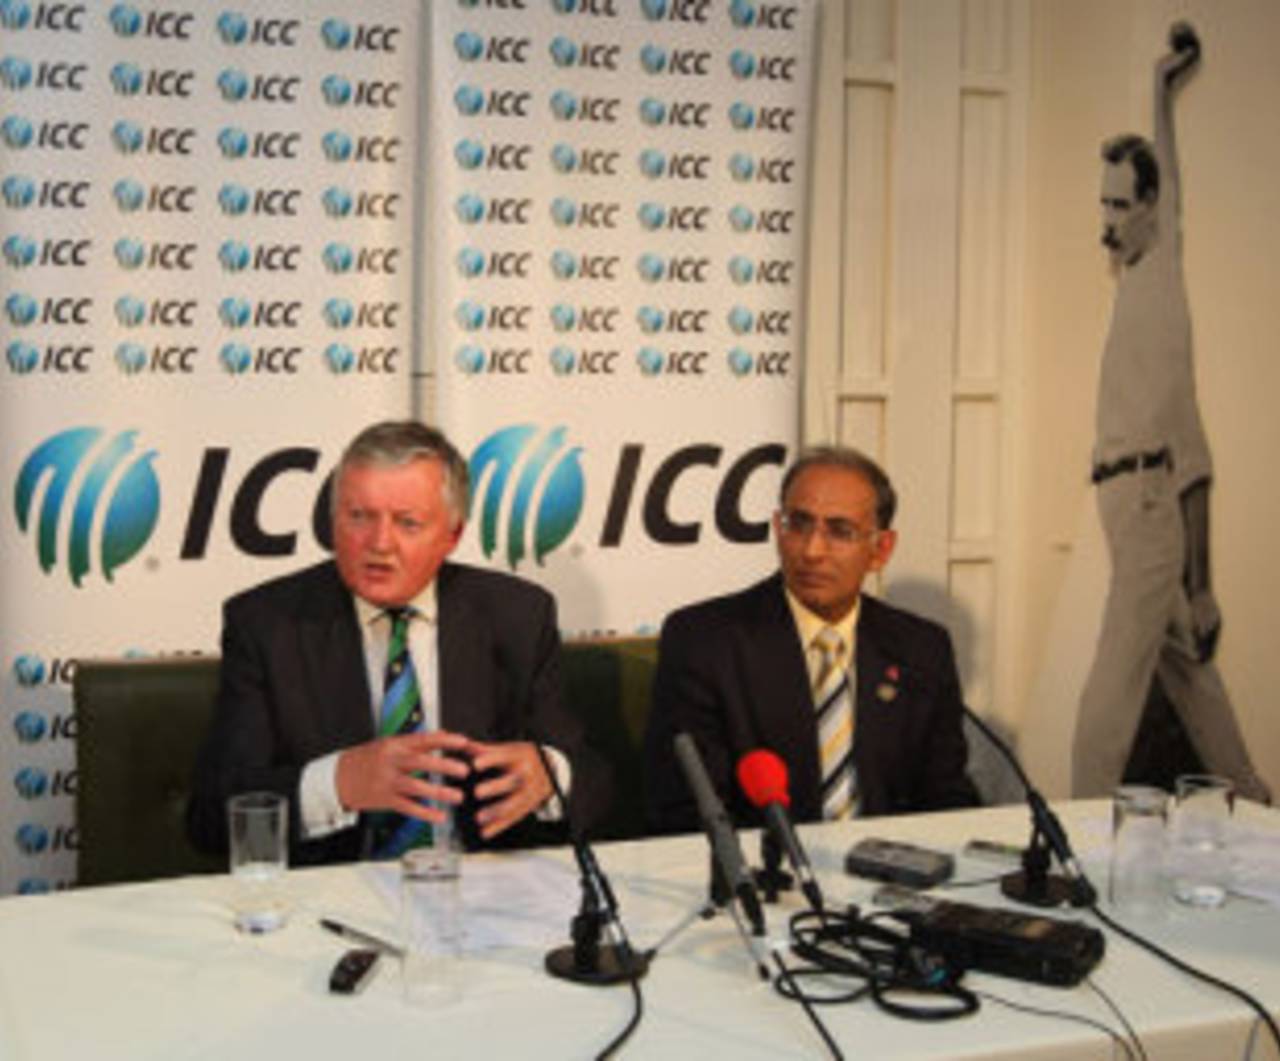 ICC president David Morgan and CEO Haroon Lorgat address the media at the MCC Museum, Lord's, June 25, 2009 
